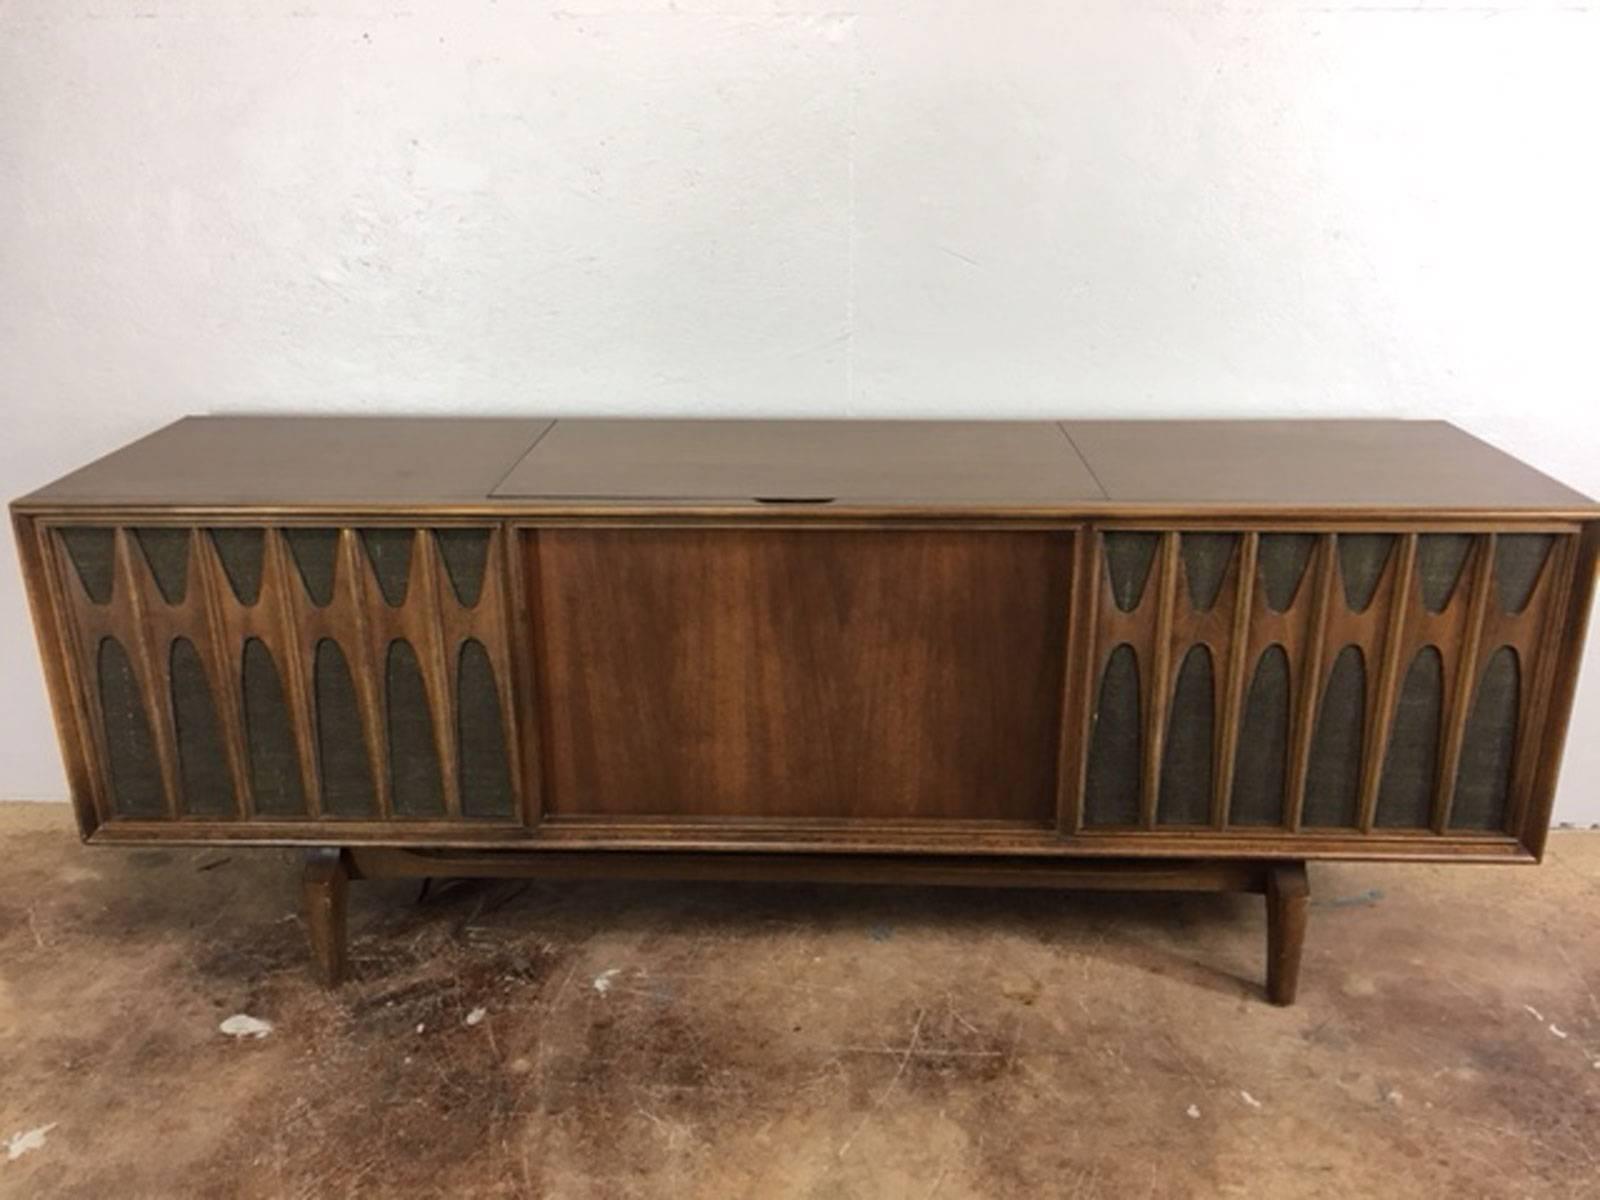 New Vista Victrola stereo cabinet.  All original, except all stereo components have been fully serviced and refurbished and are in excellent working condition.  Both radio and phonograph function and work properly.  Sound is excellent.  